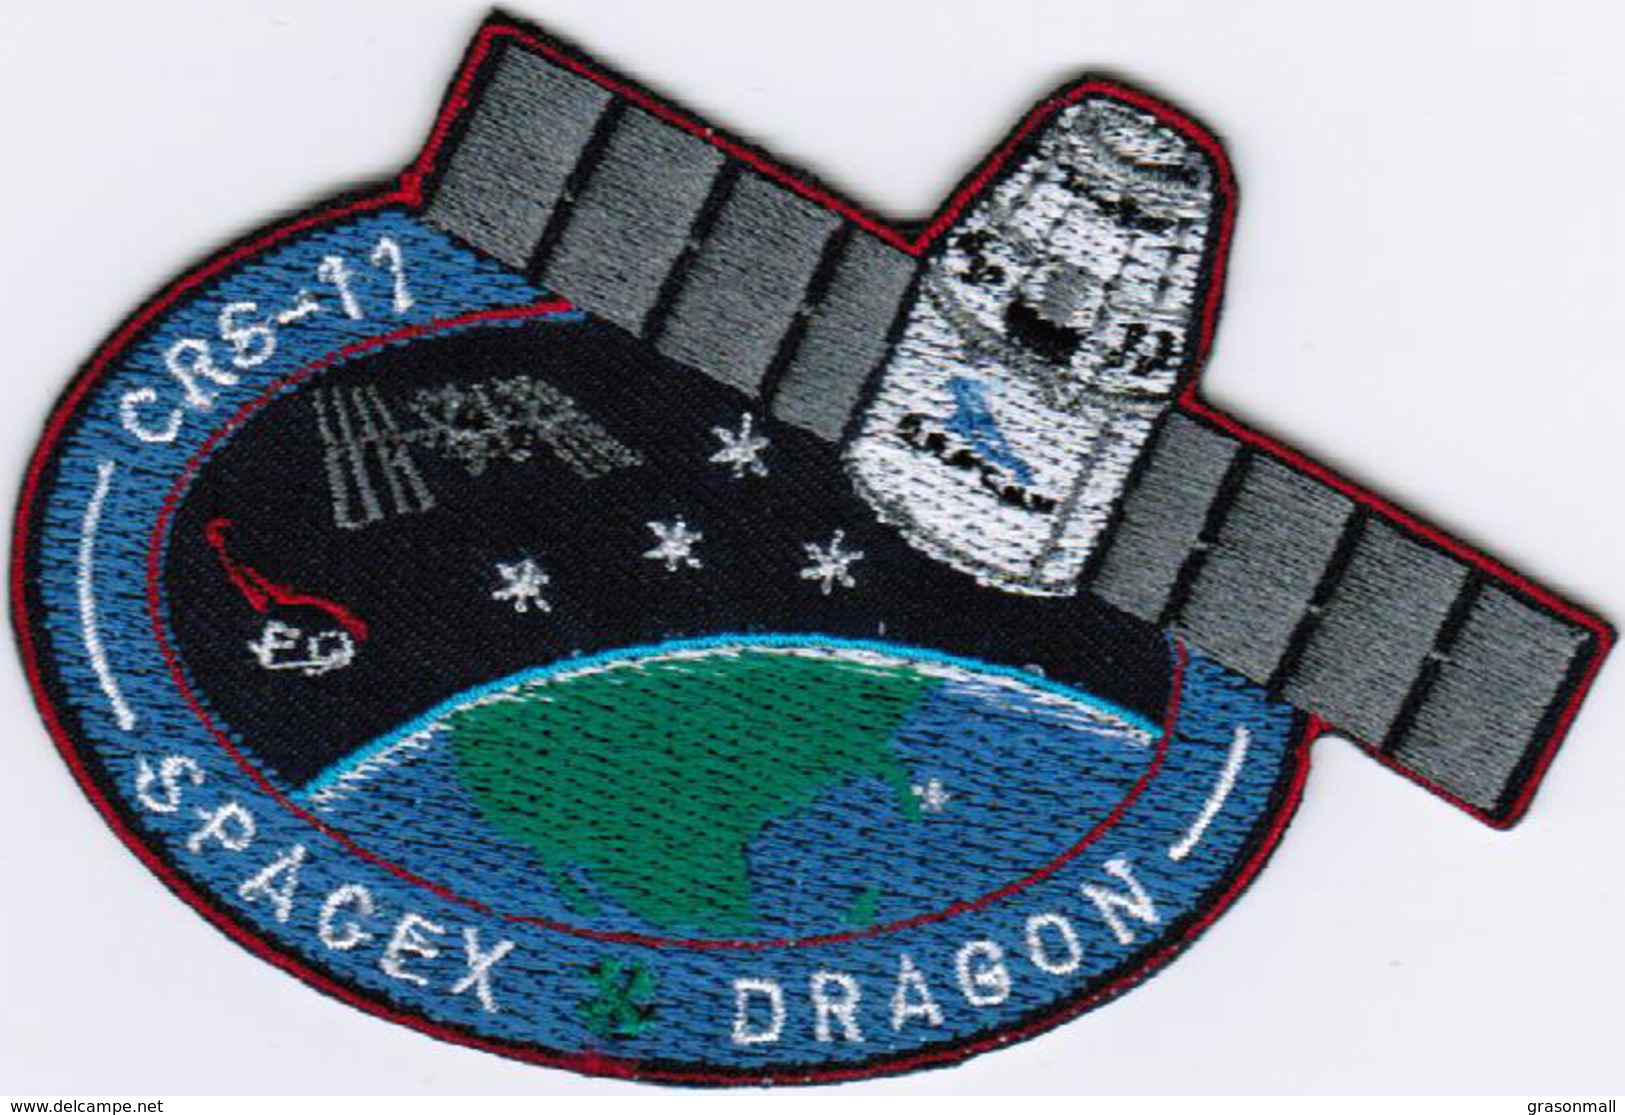 ISS Expedition 52 Dragon SPX-11 Spacex International Space Station Iron On Patch - Patches